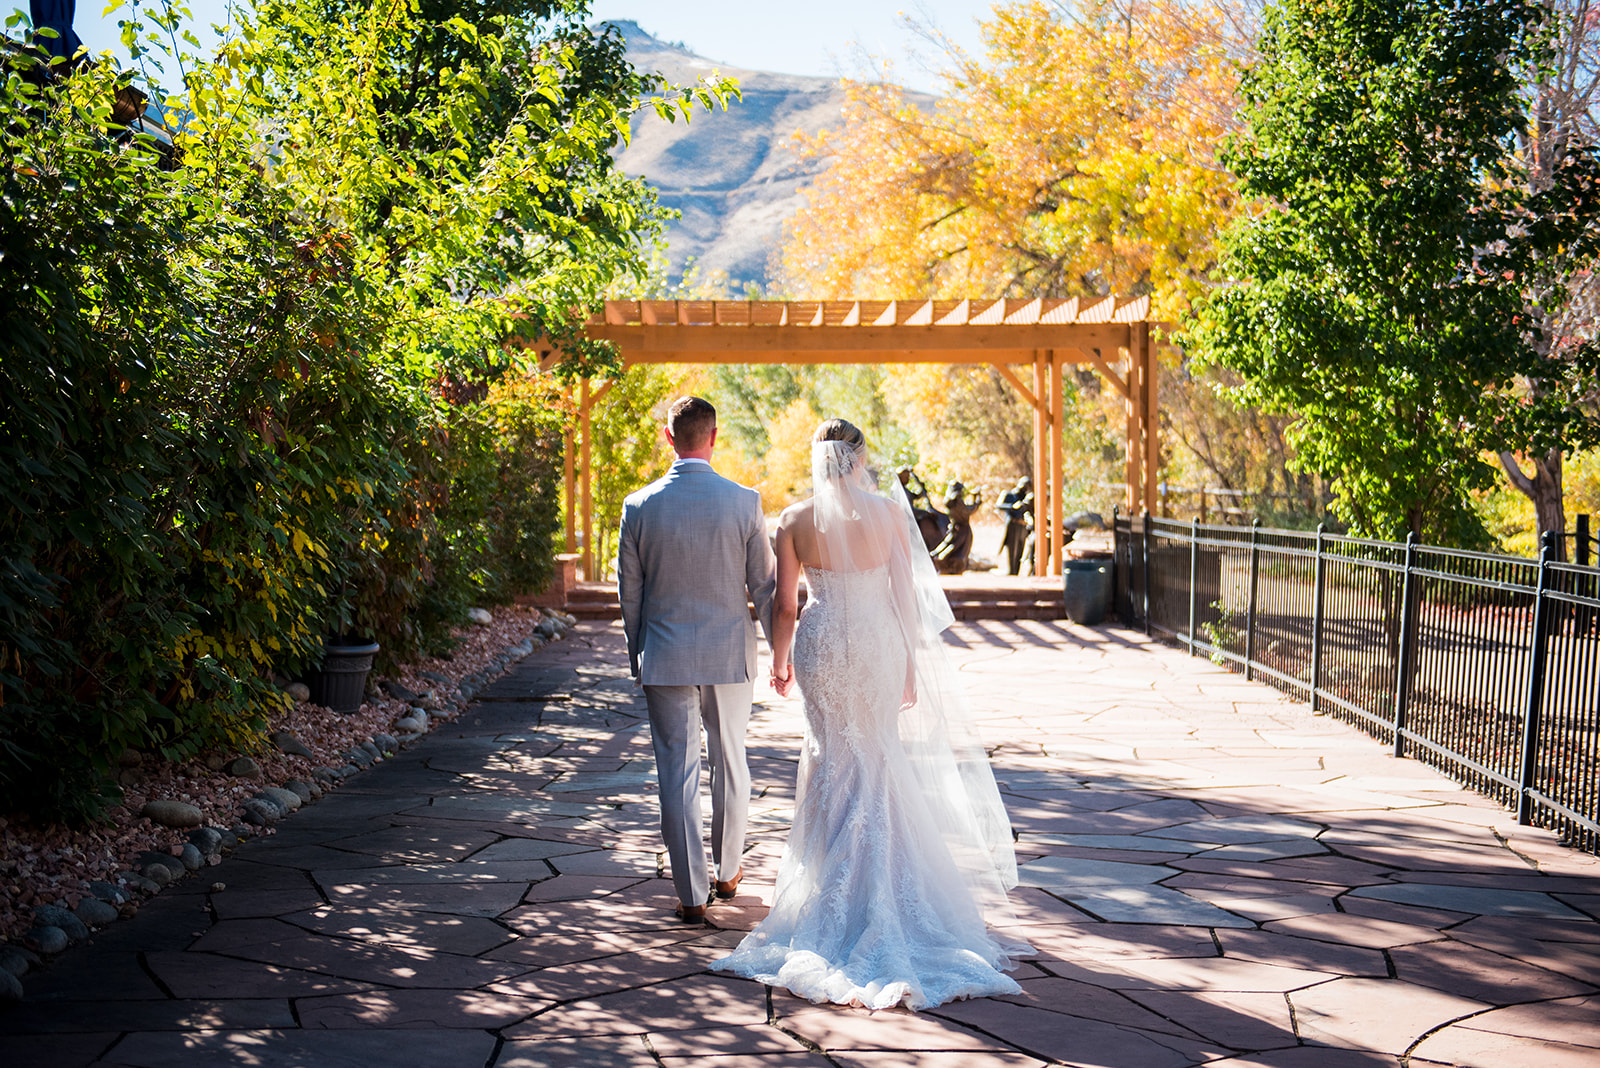 Bride and groom walk hand in hand away from the camera toward a stunning view of fall foilage.